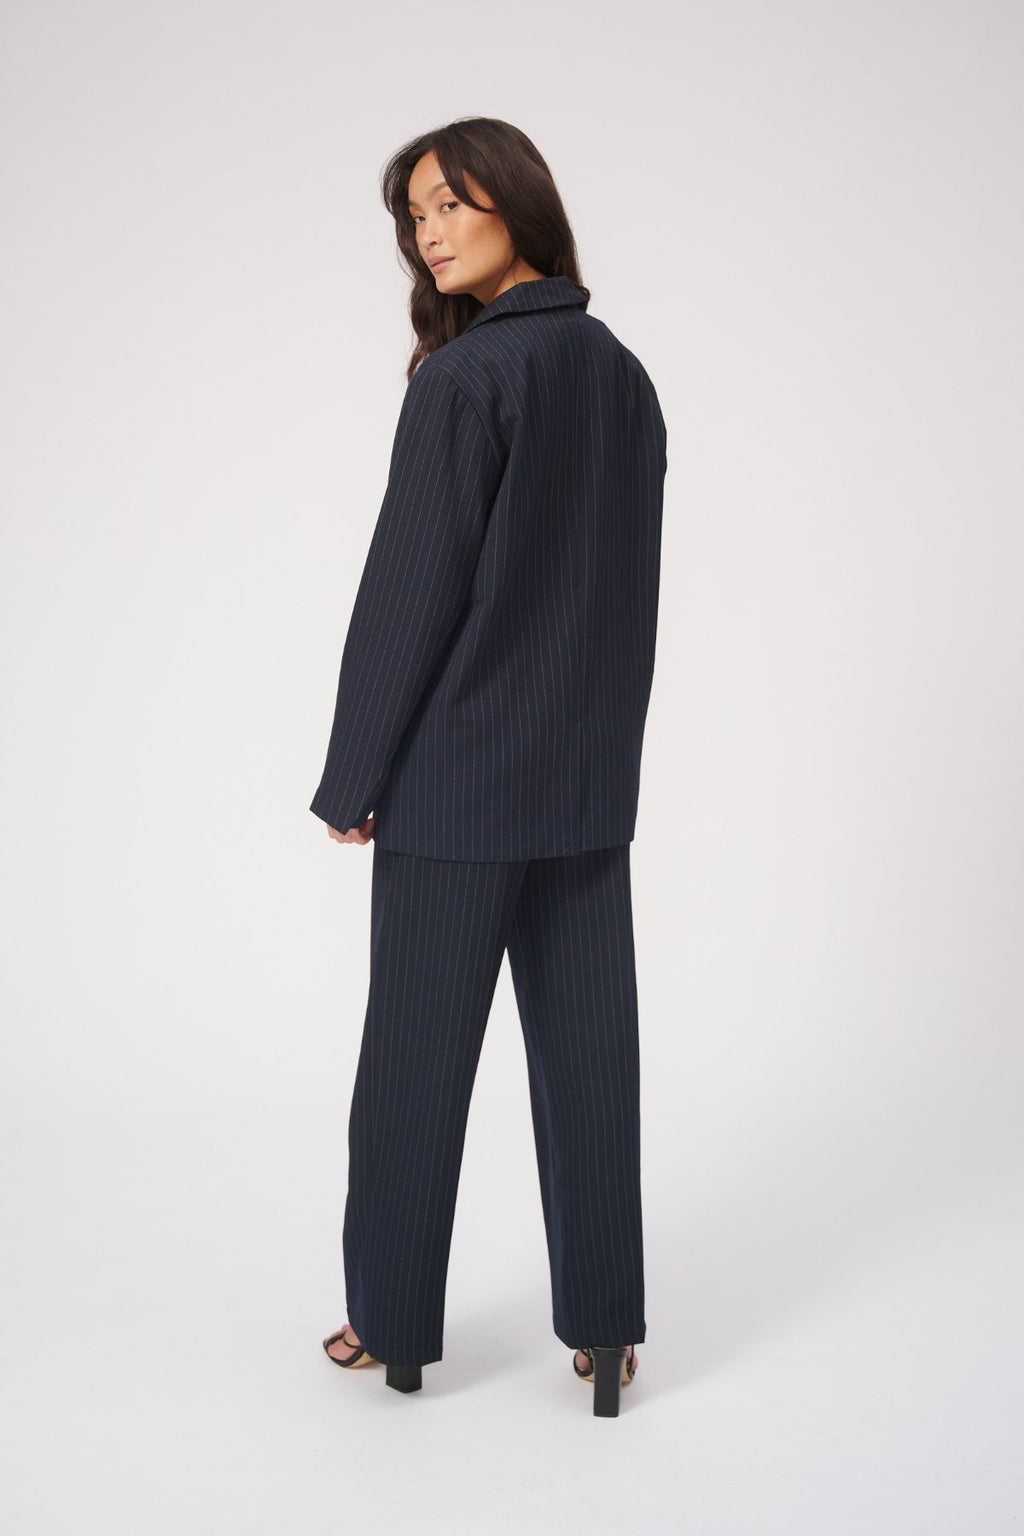 Oversized Suit (Navy Pinstripe) - Package Deal